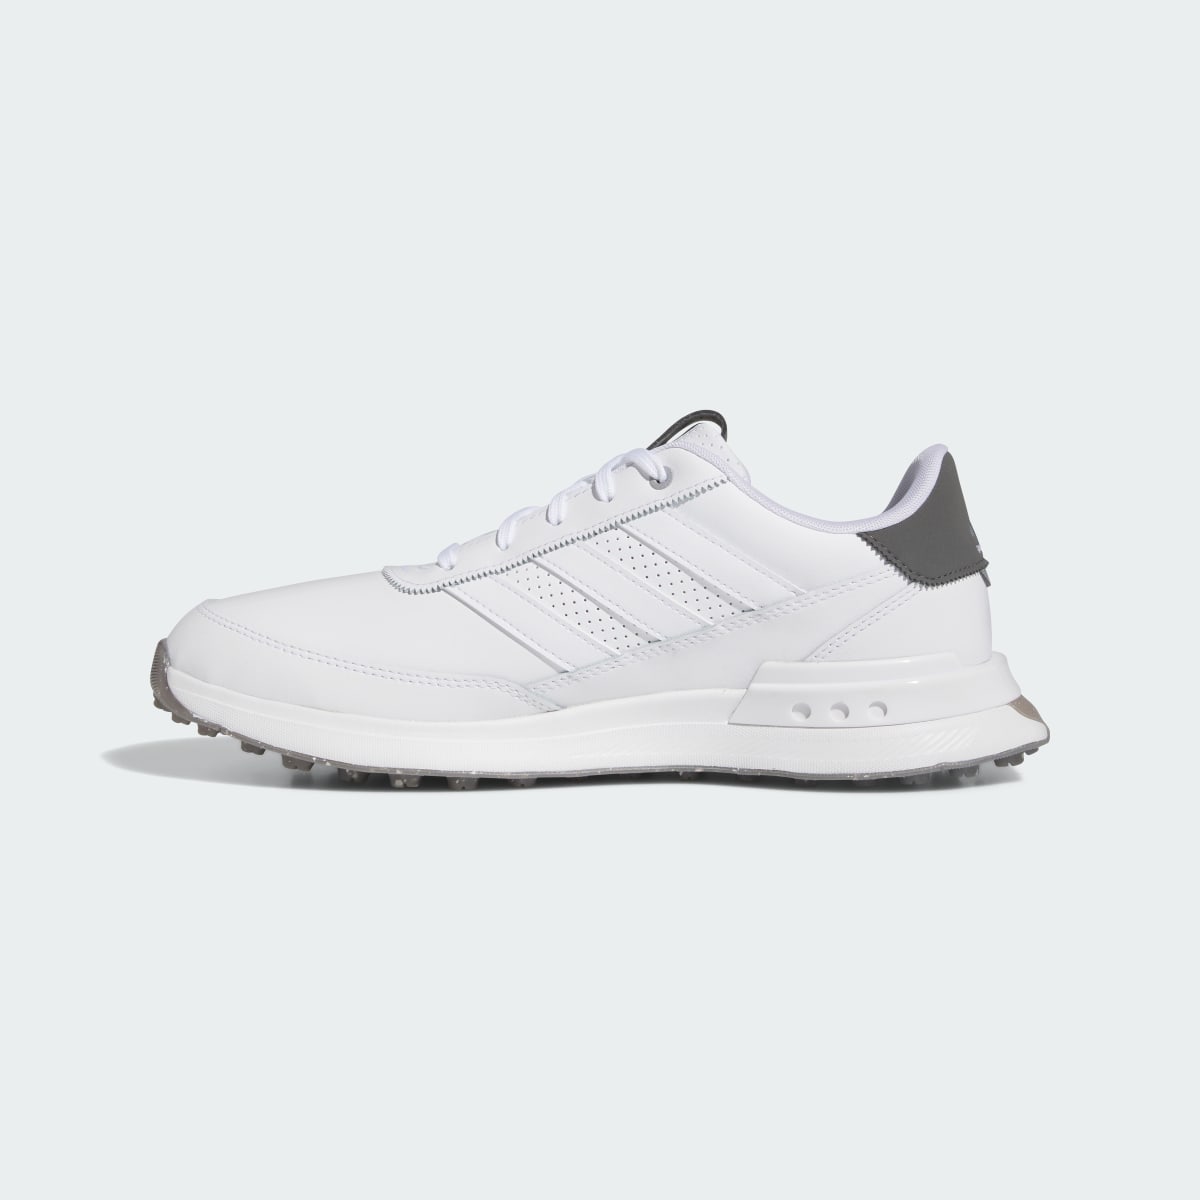 Adidas S2G 24 Leather Spikeless Golf Shoes. 10